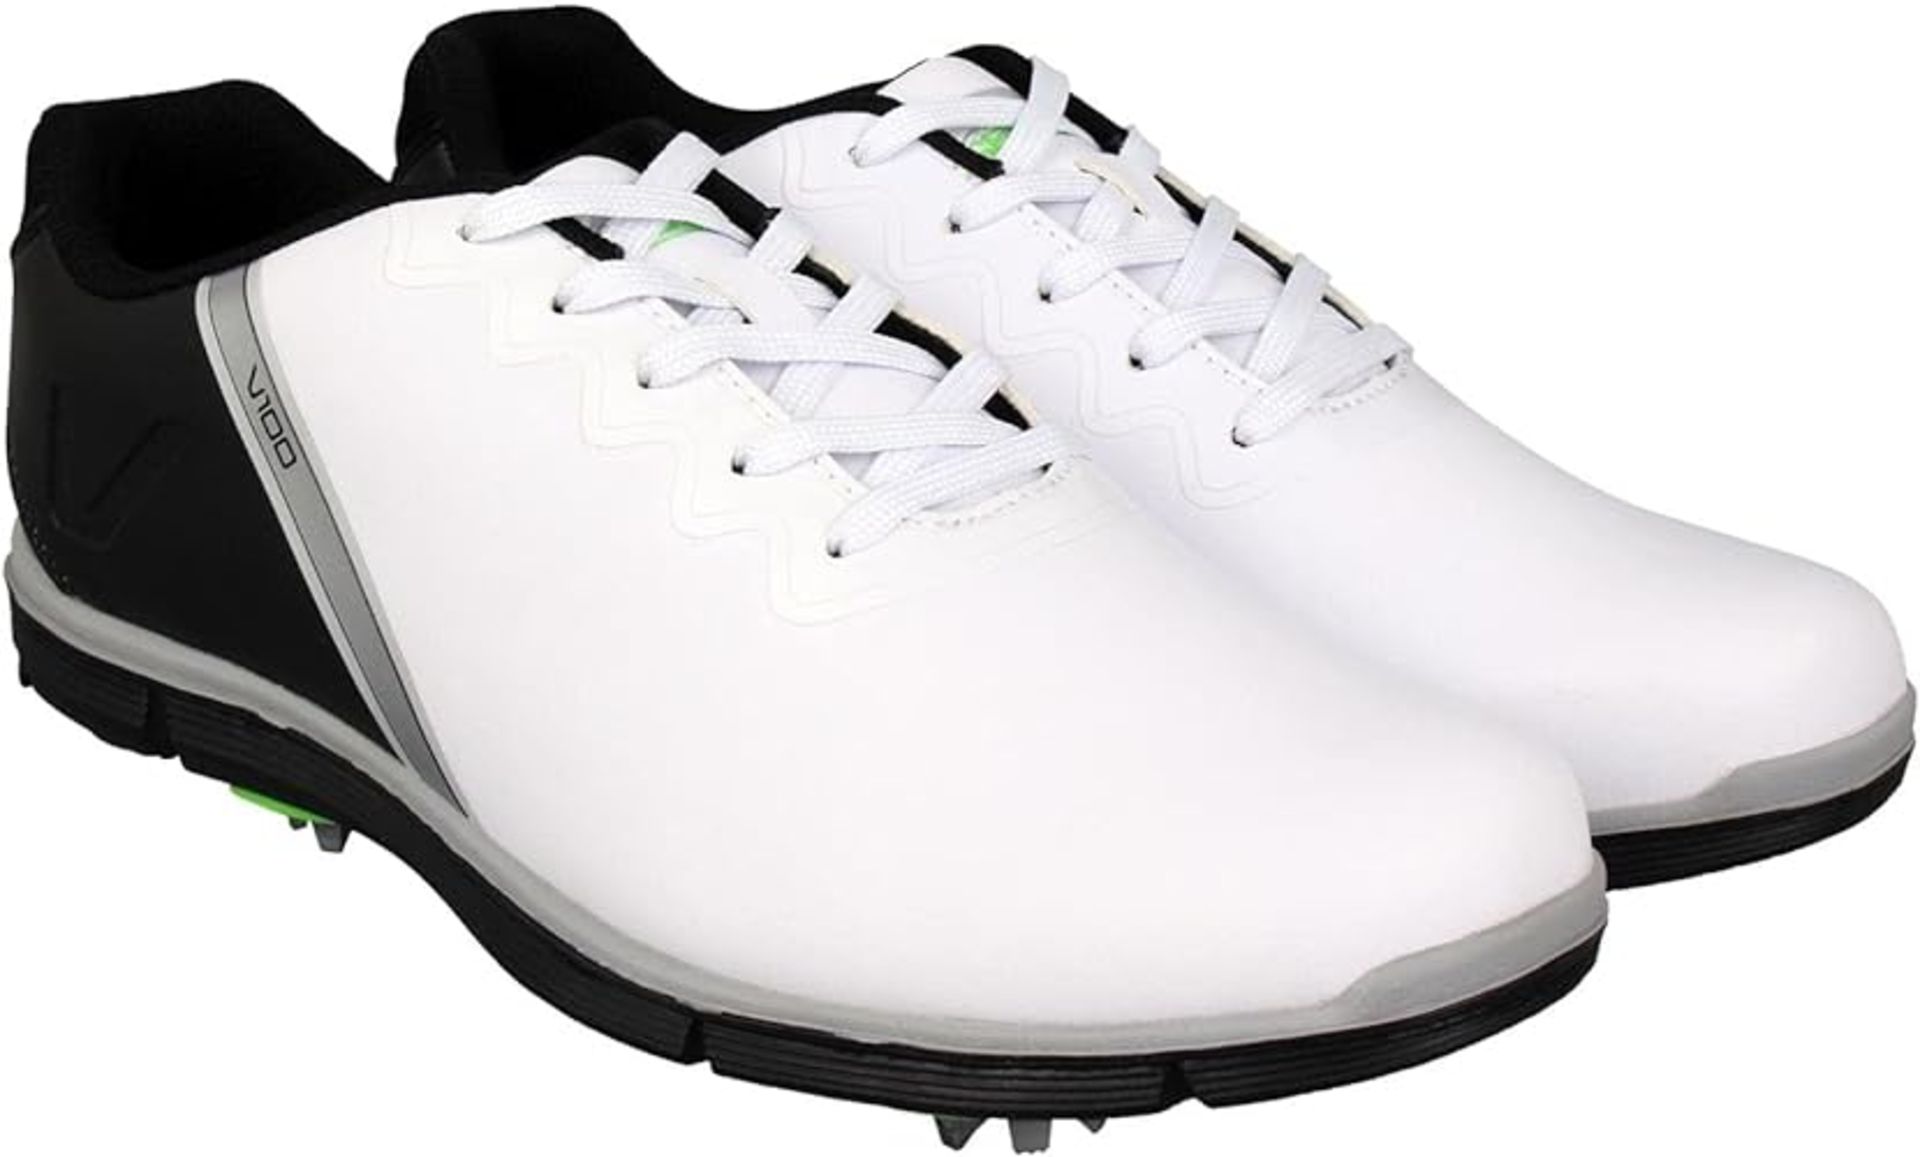 2 X BRAND NEW PAIRS OF SLAZENGER V100 PROFESSIONAL GOLF SHOES SIZE 11 RRP £89 EACH S1RA - Image 3 of 3